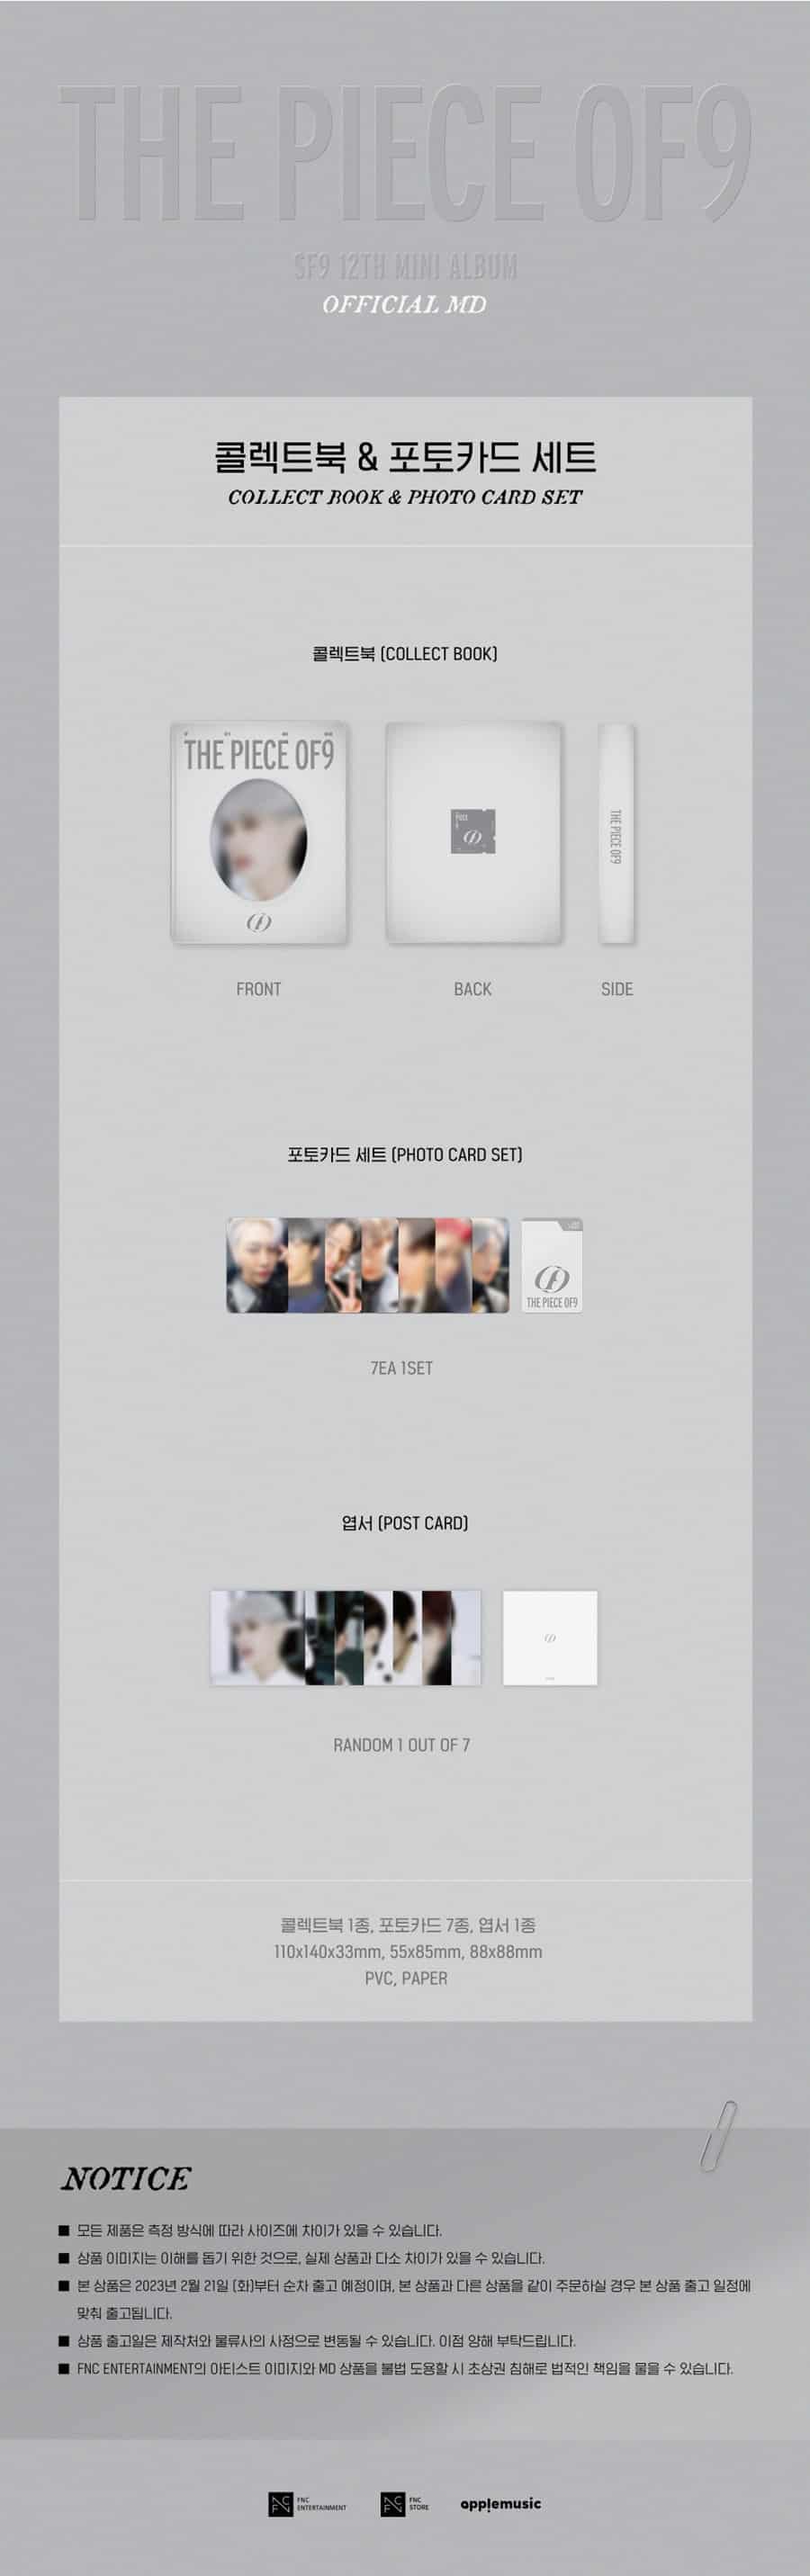 sf9-the-piece-of9-official-md-collect-book-photo-card-set-wholesales